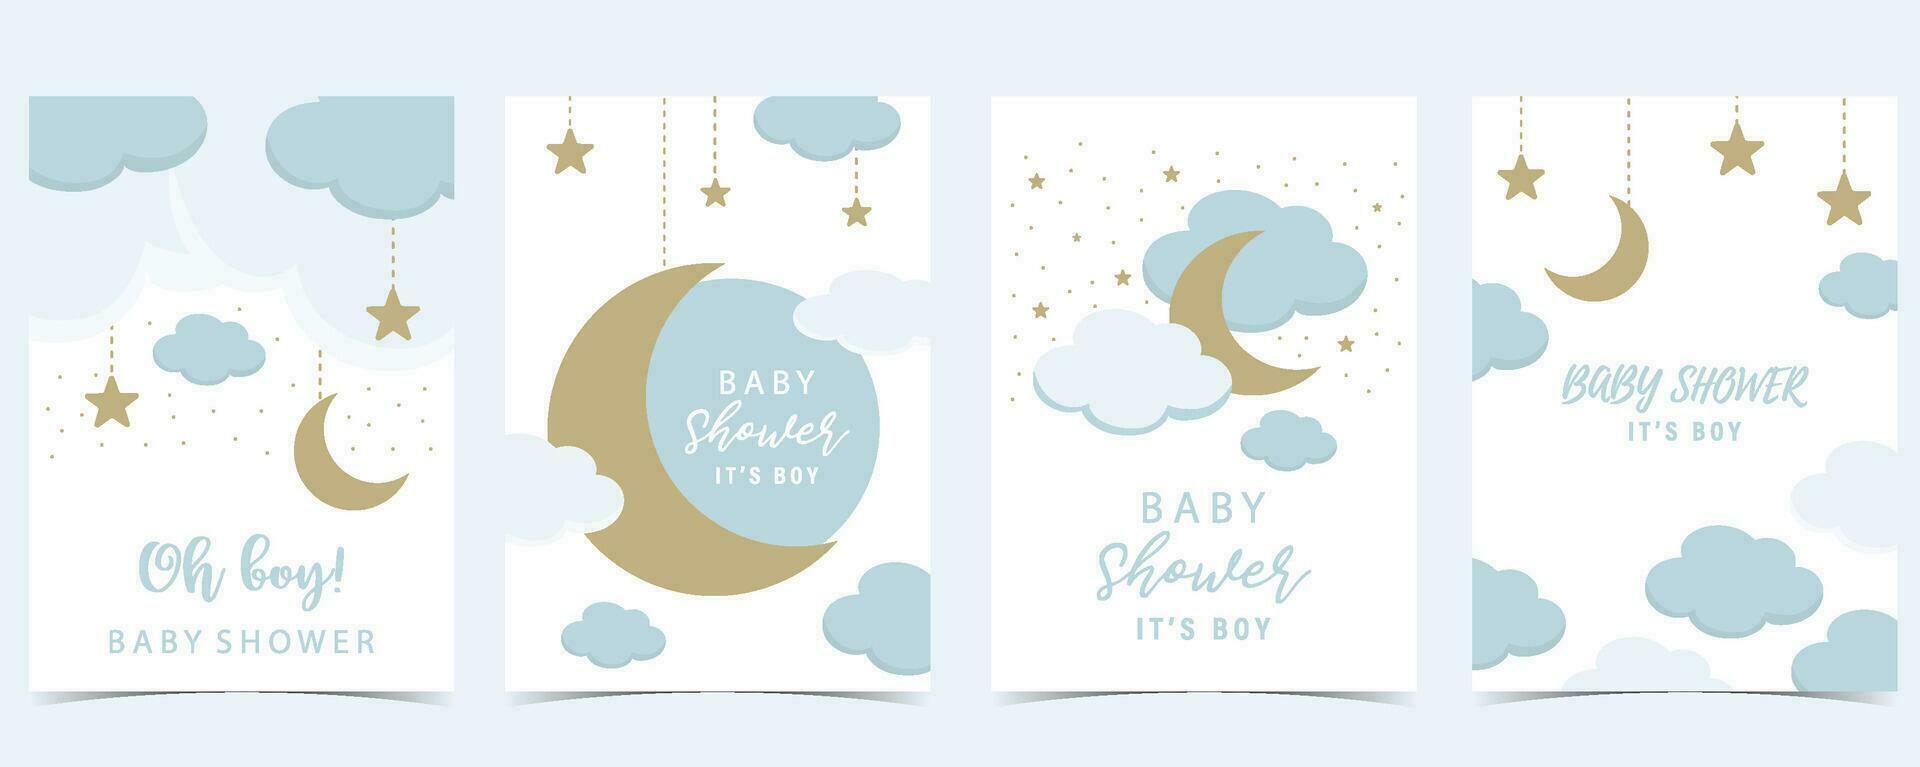 Baby shower invitation card for boy with balloon, cloud,sky, blue vector